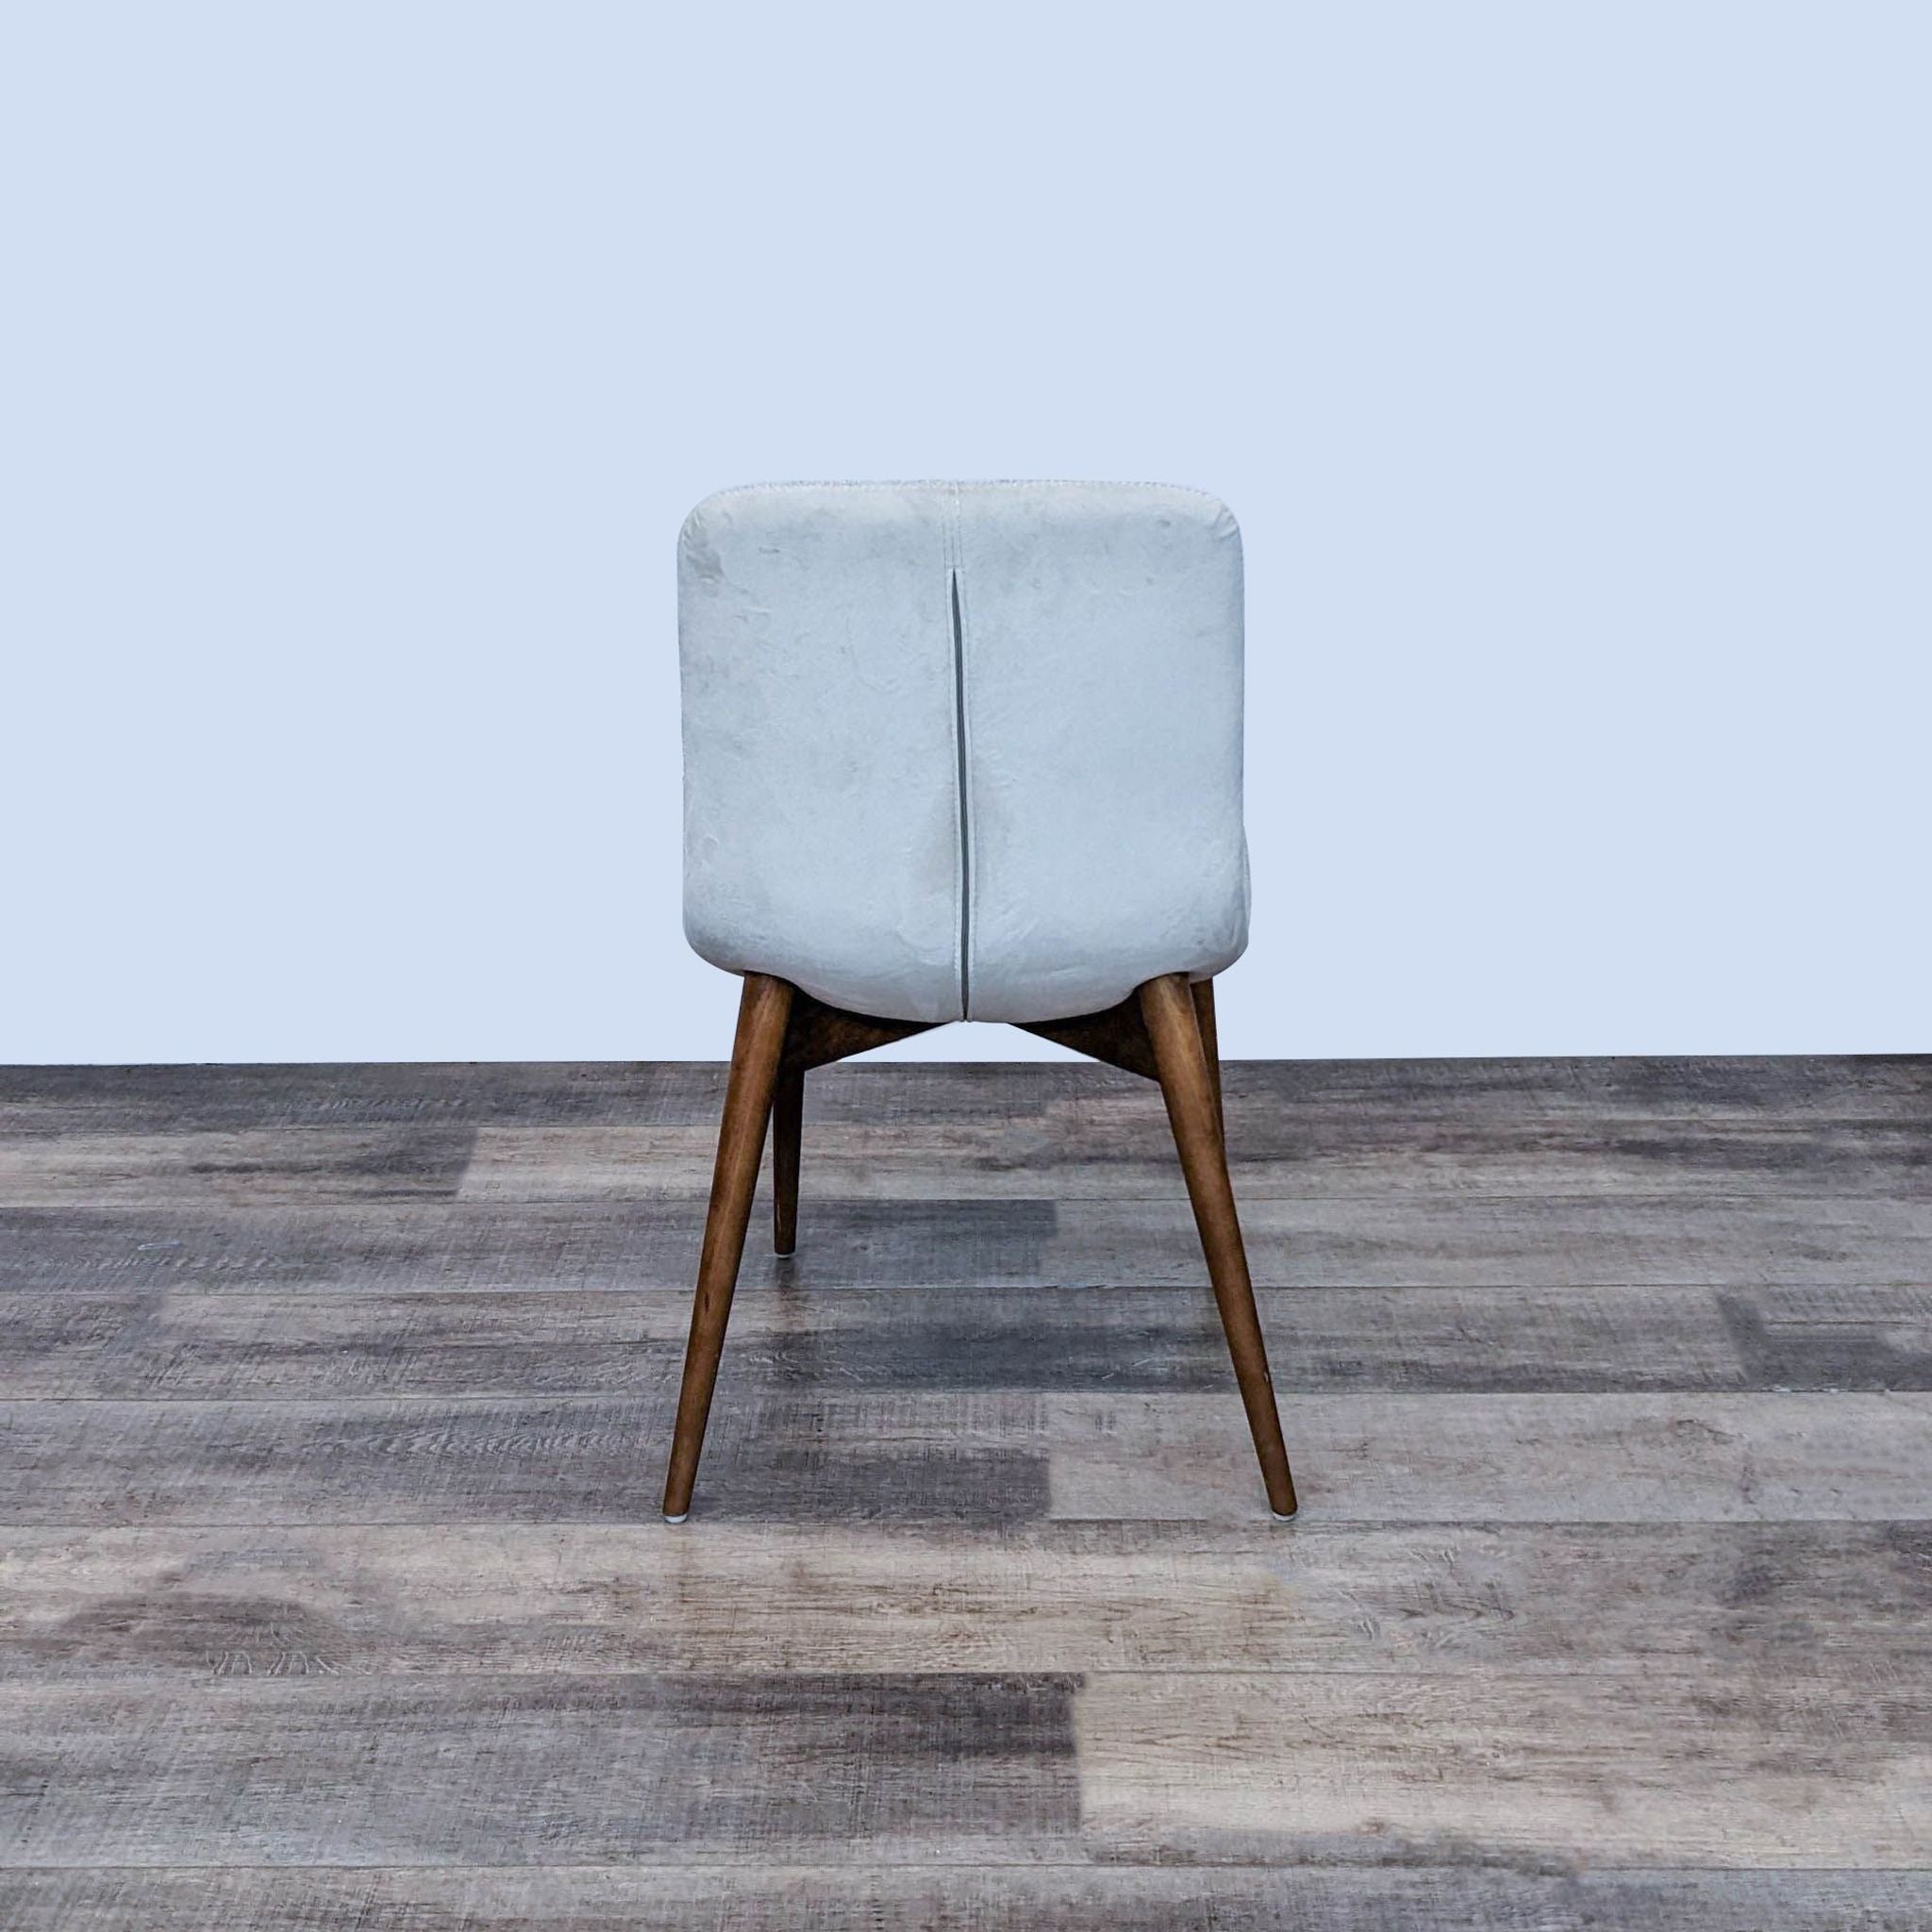 Front-facing Reperch chair showing its light fabric upholstery and wooden legs on a wooden floor. 